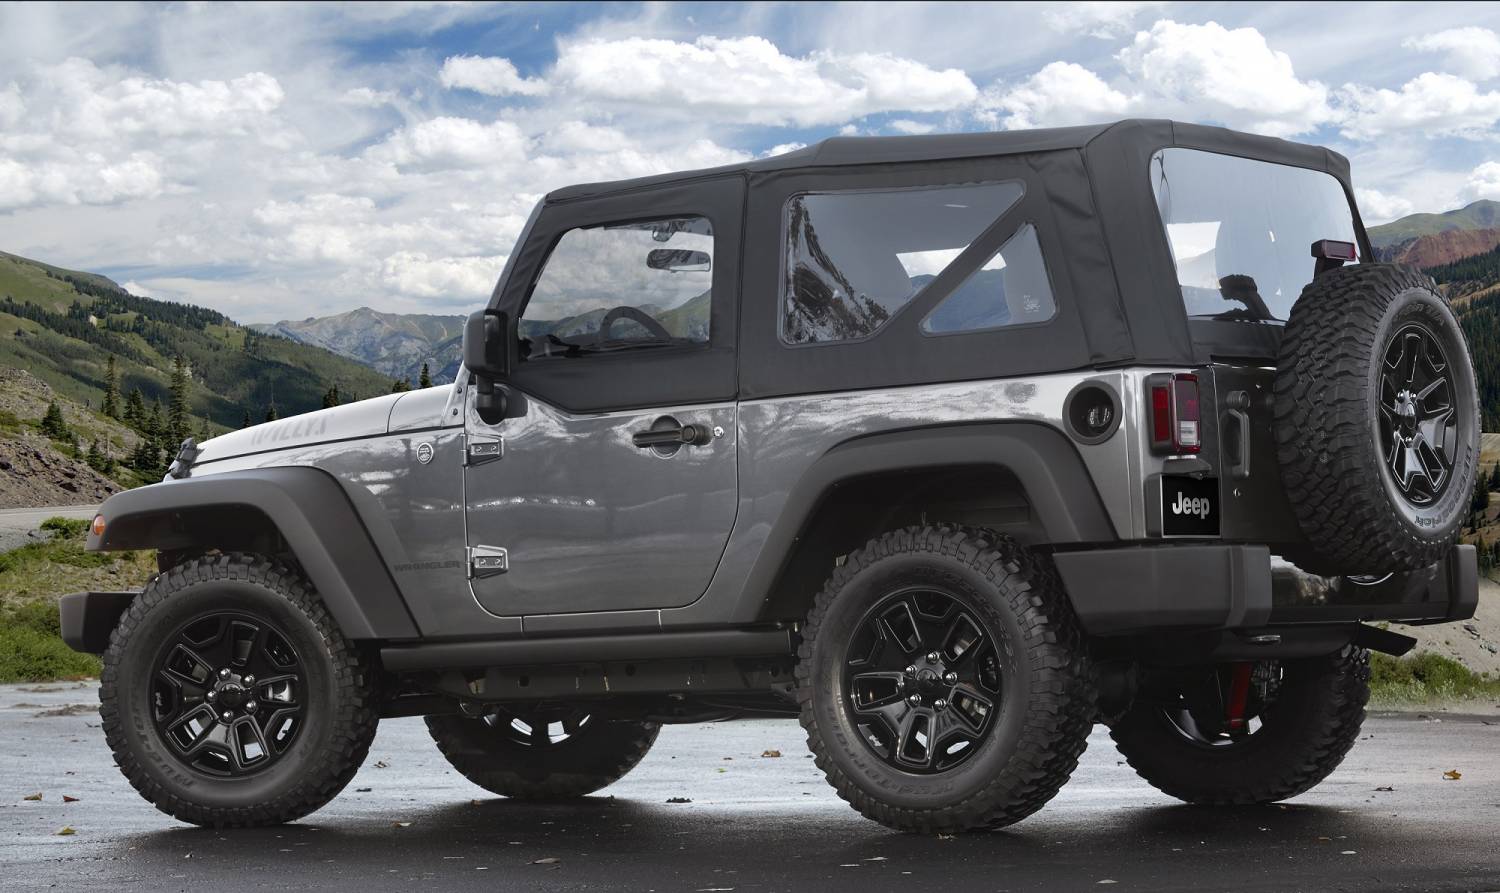 Jeep Wrangler Willys: Like Using A Hatchet To Peel Taters